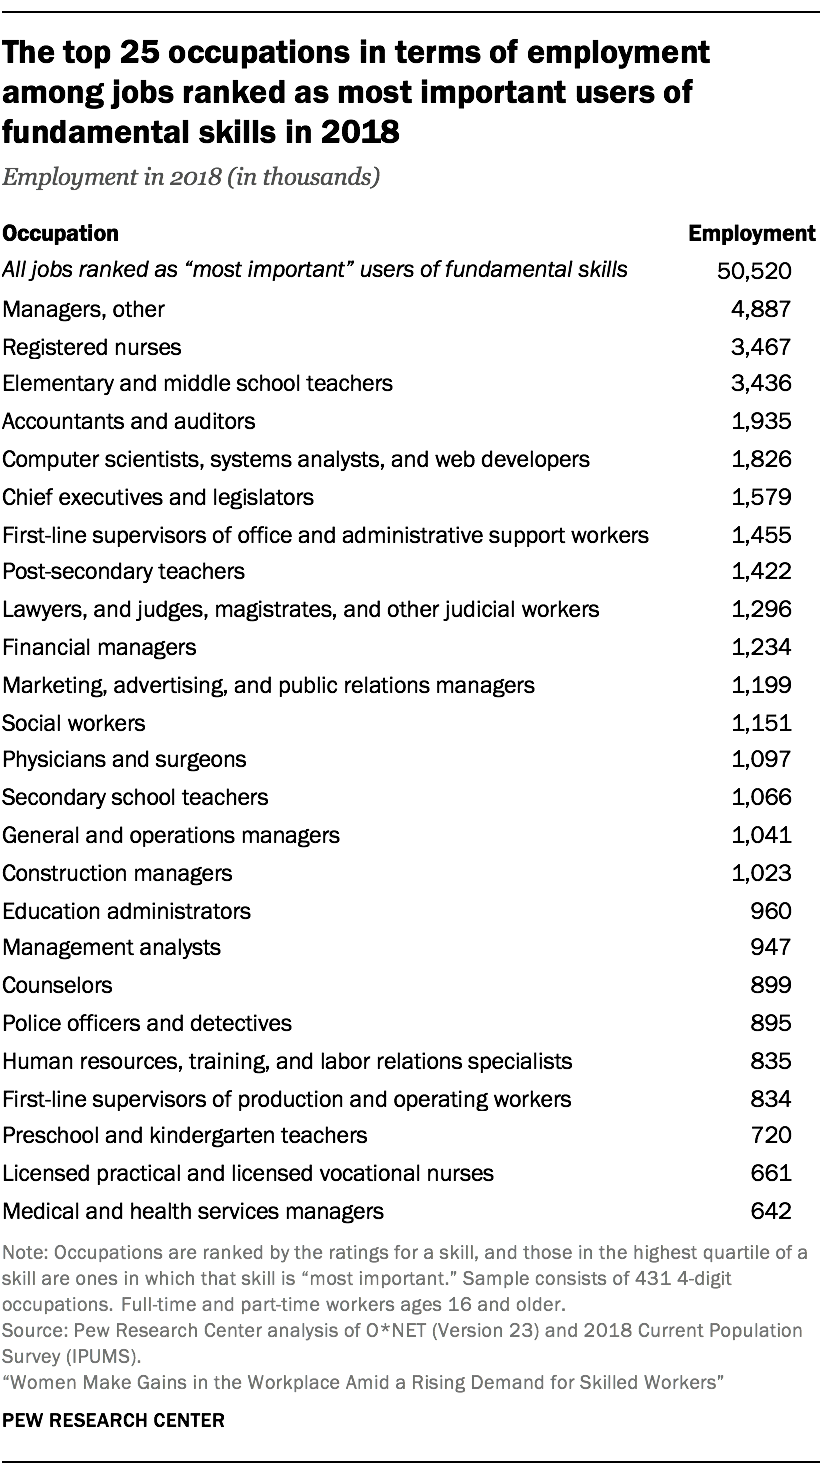 The top 25 occupations in terms of employment among jobs ranked as most important users of fundamental skills in 2018